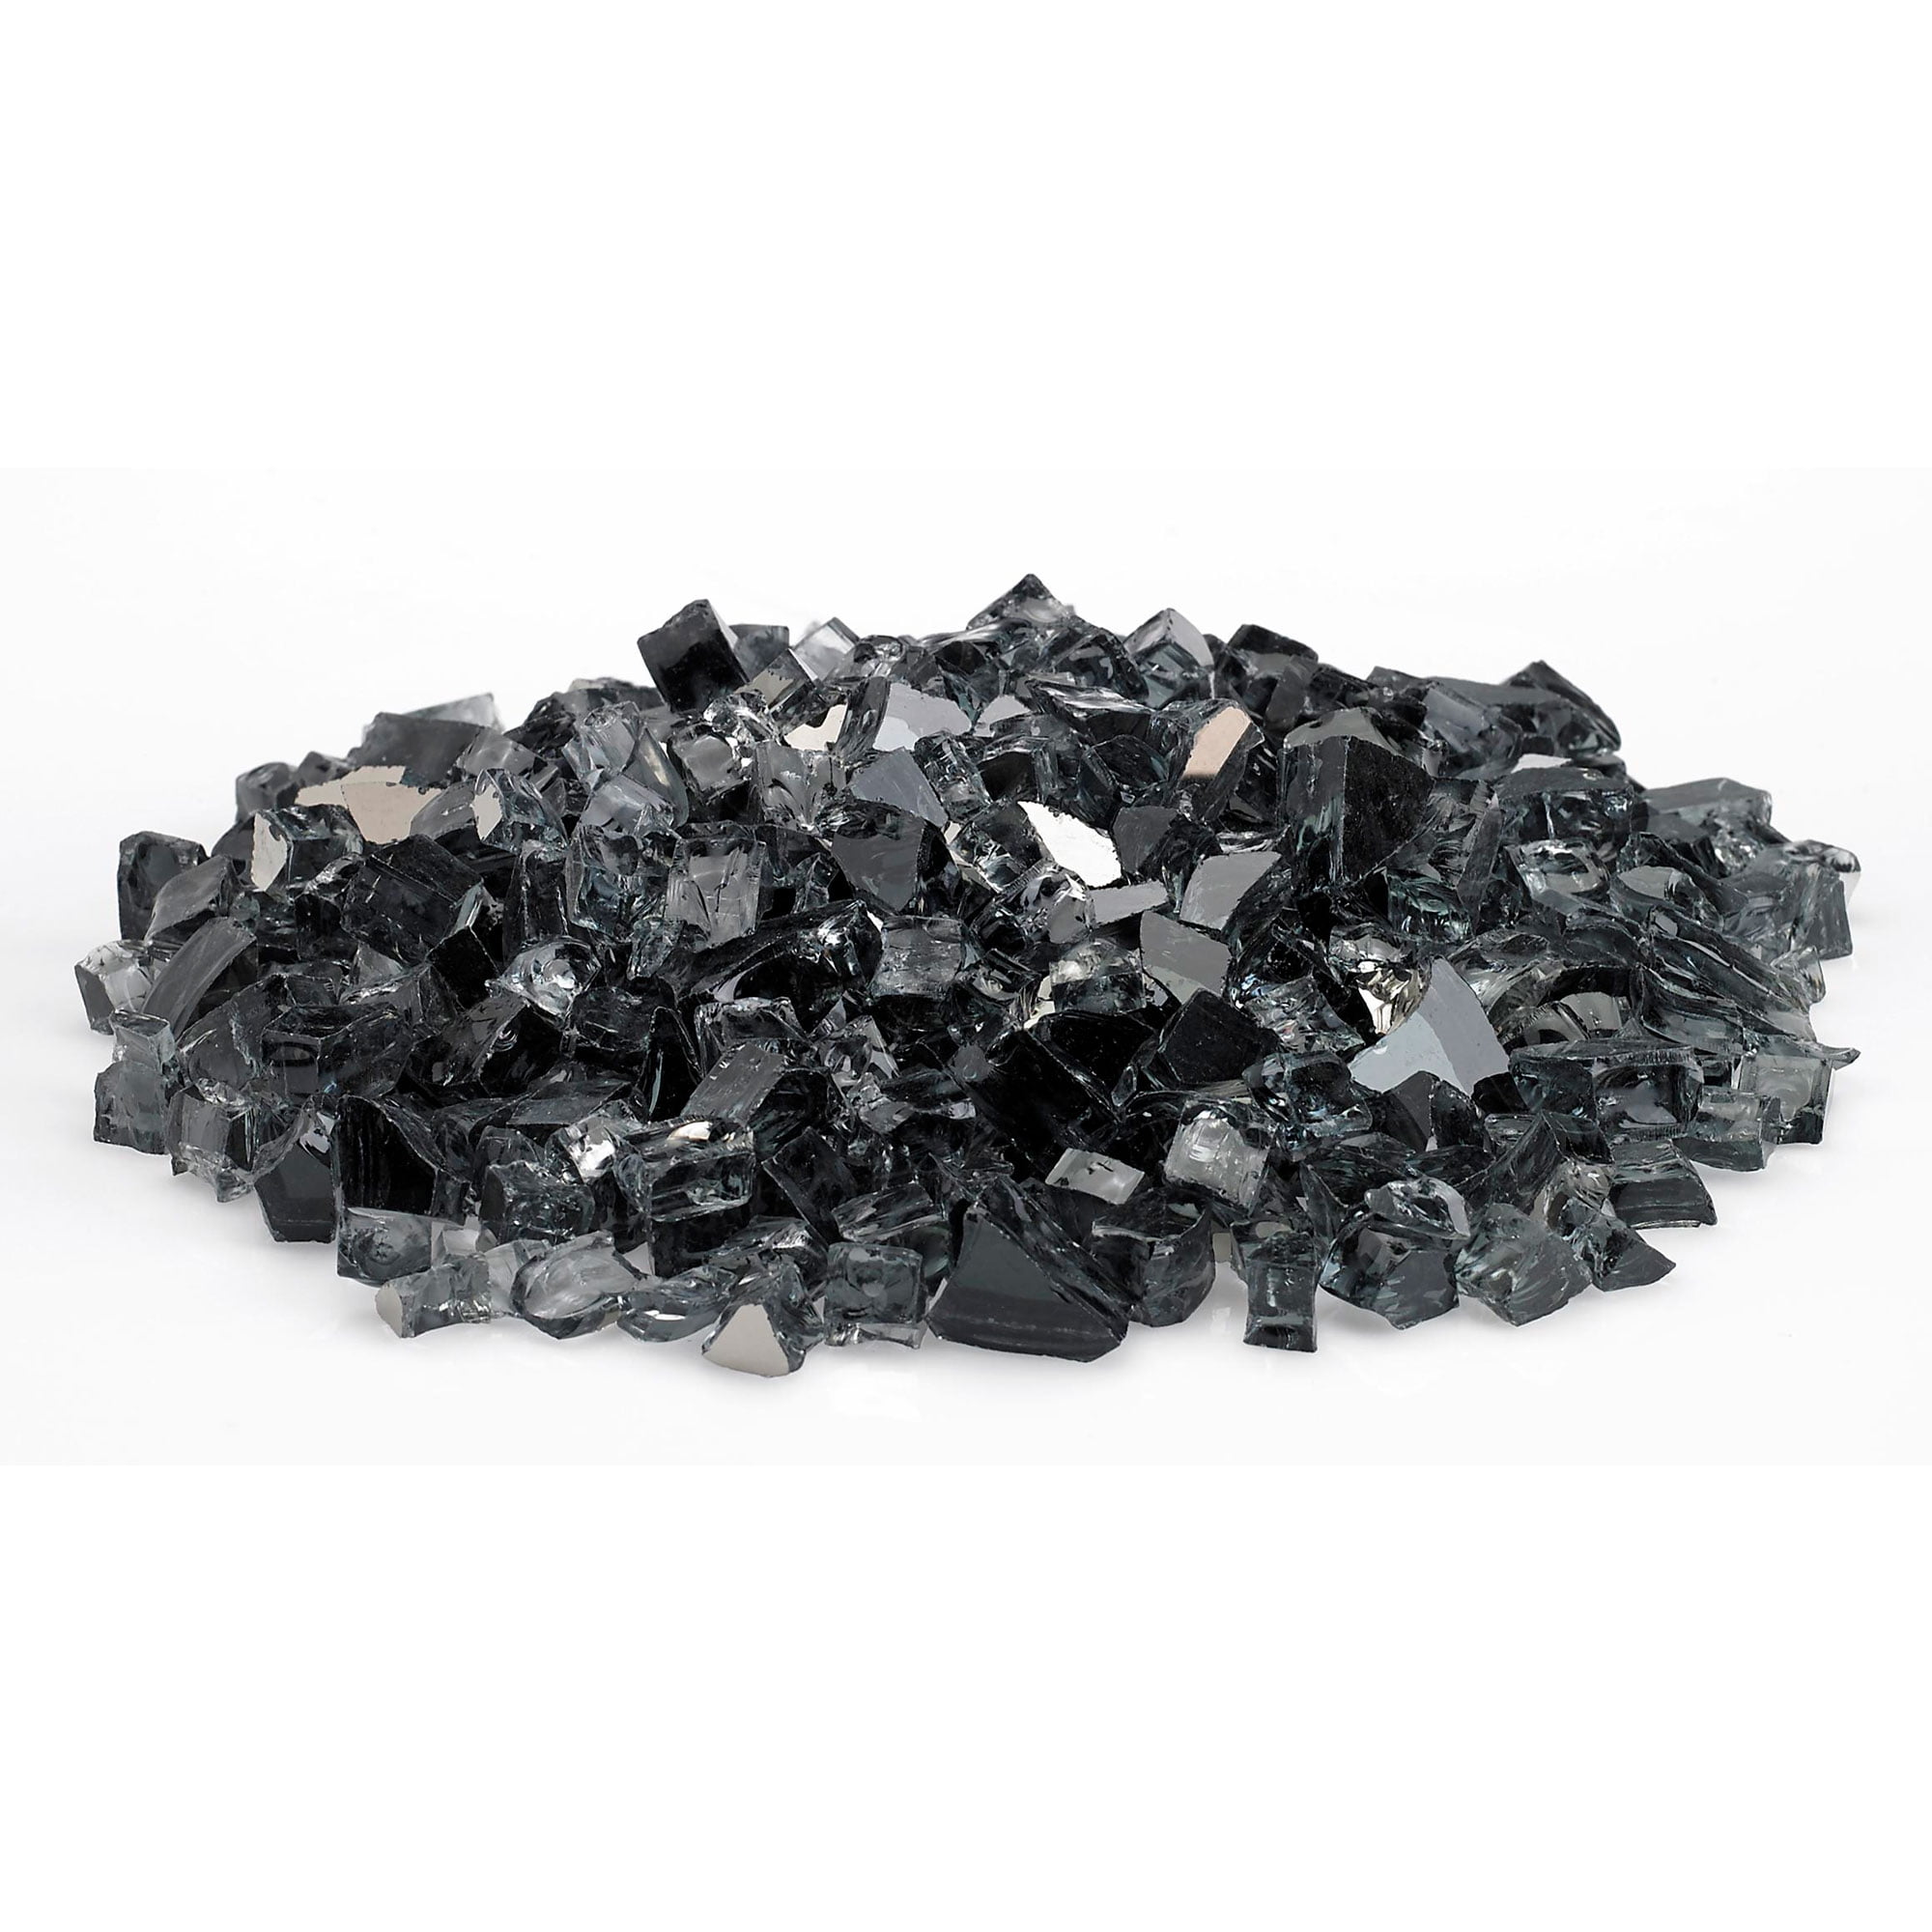 Picture of American Fireglass AFF-GRYRF12-10 0.5 in. Gray Reflective Fire Glass - 10 lbs